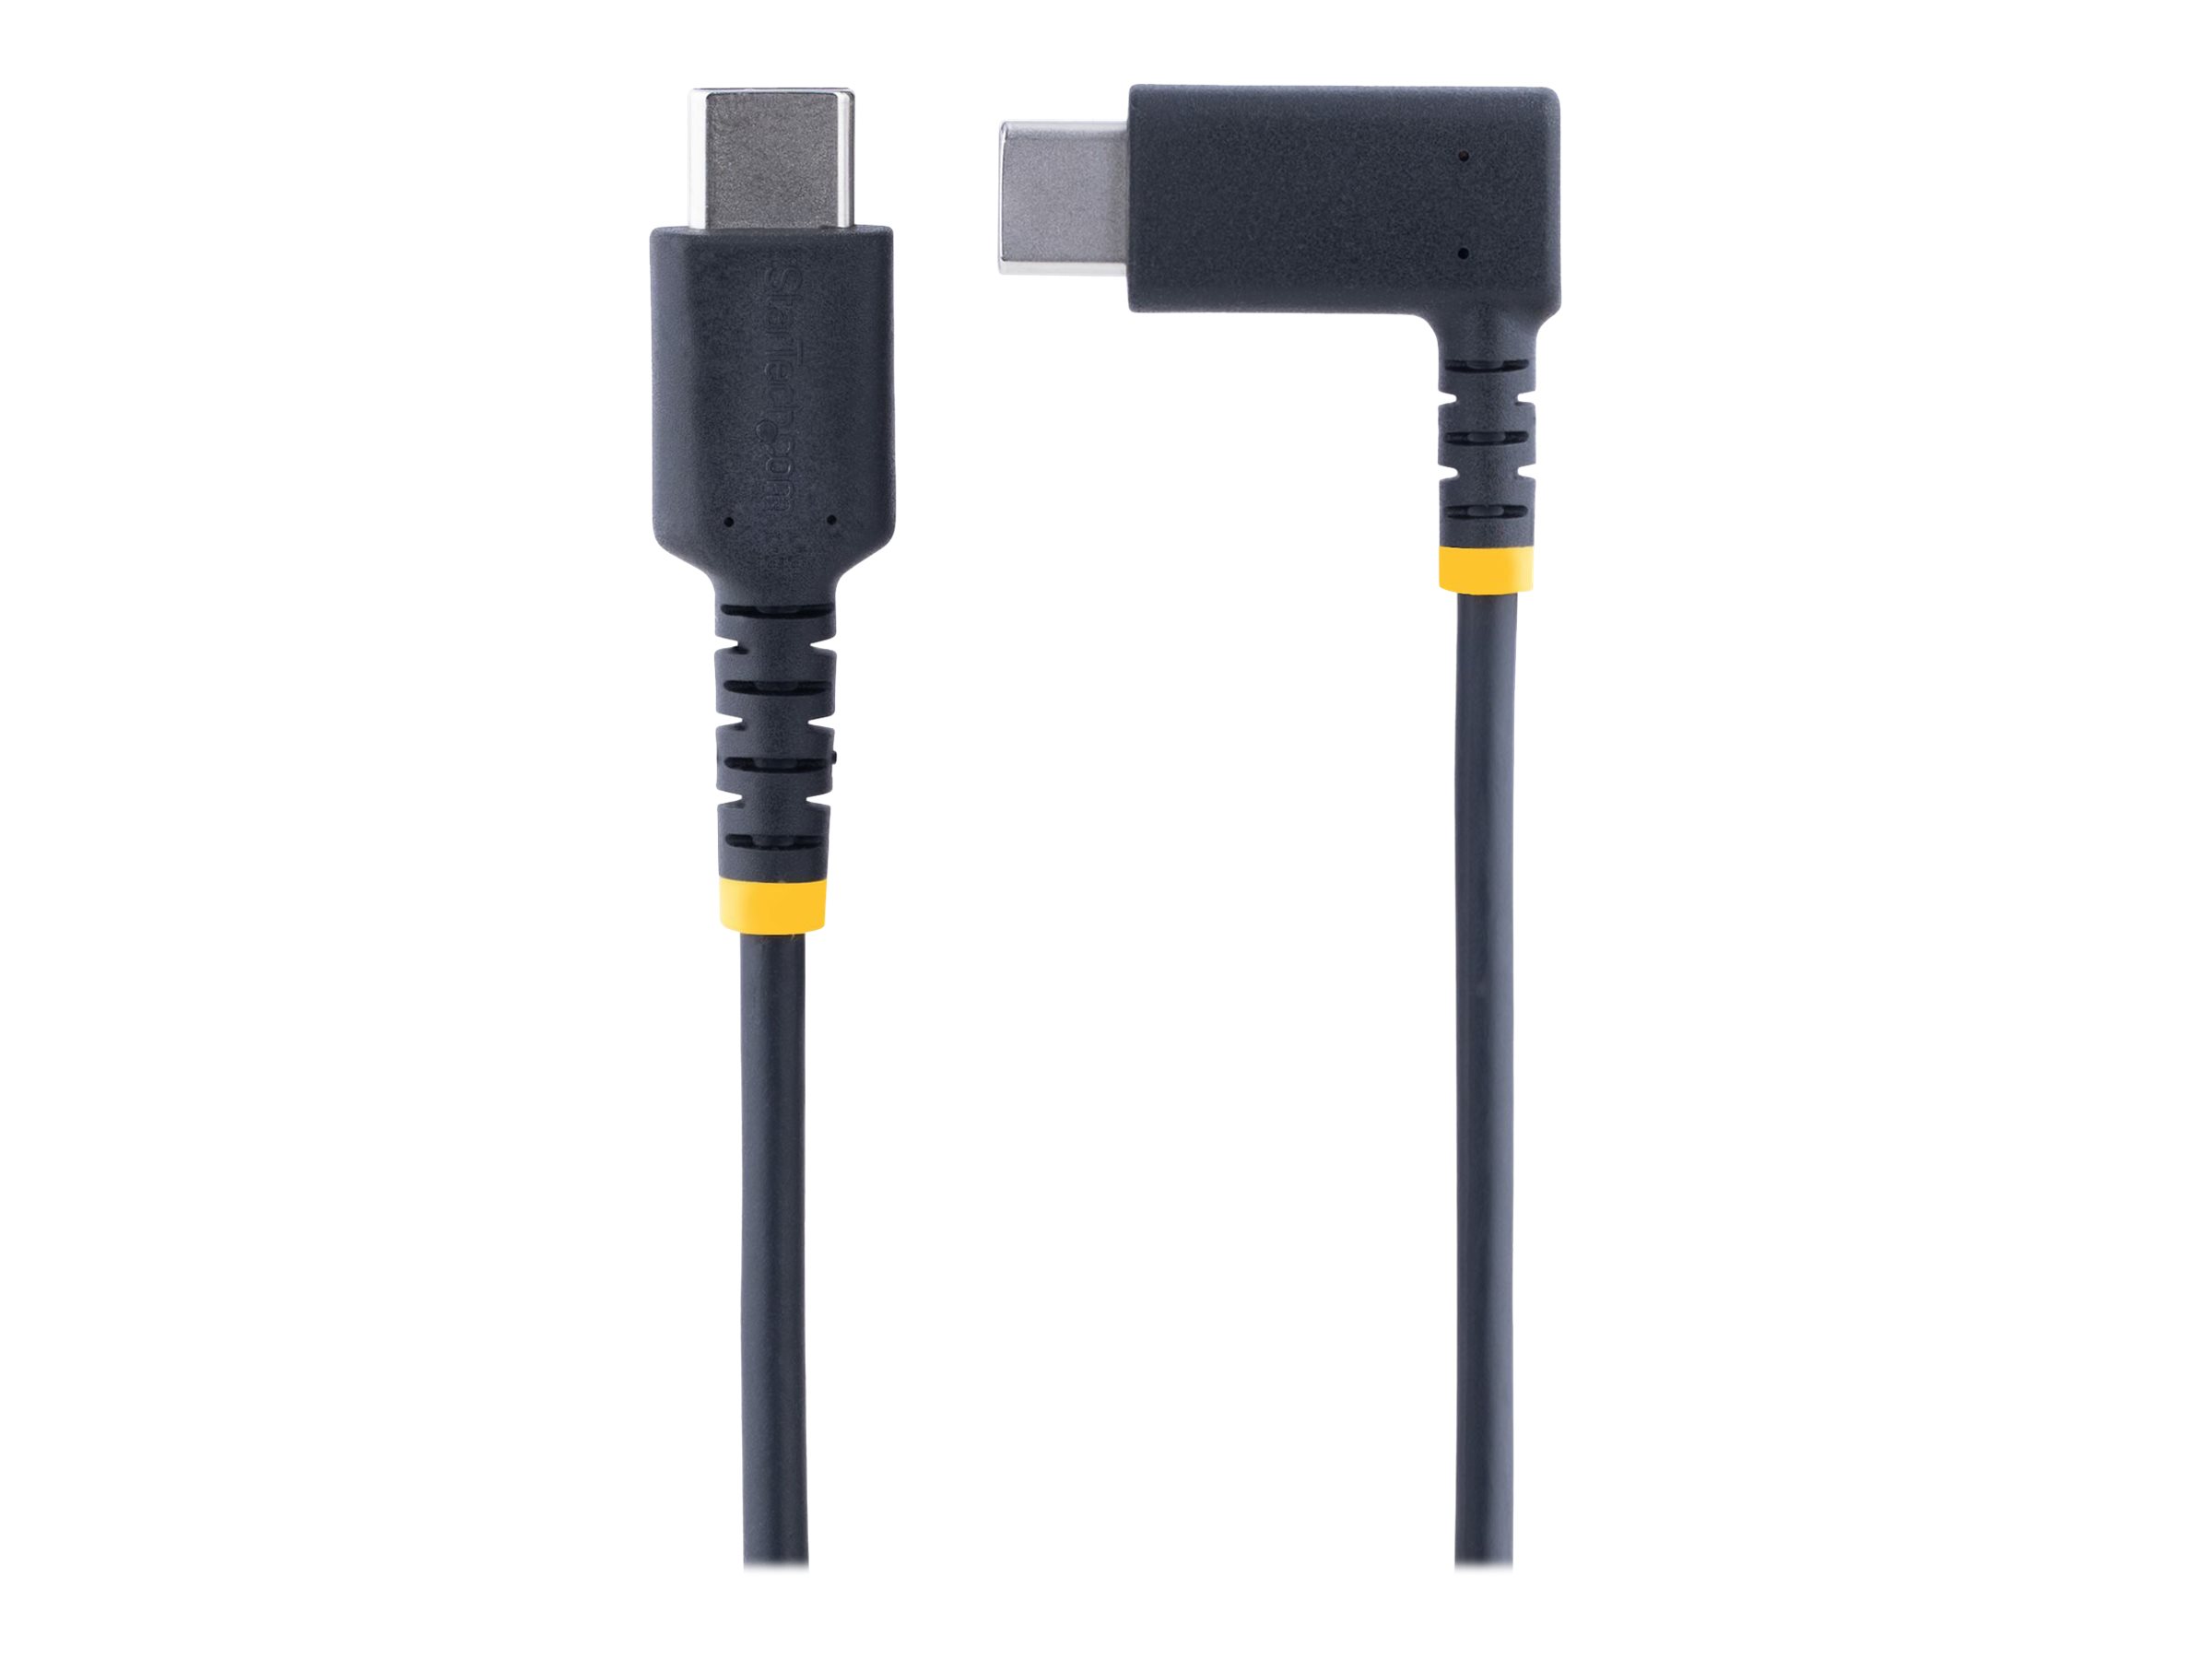 StarTech.com 1ft (30cm) USB C Charging Cable Right Angle, 60W PD 3A, Heavy Duty Fast Charge USB-C Cable, USB 2.0 Type-C, Durable and Rugged Aramid Fiber, S20/iPad/Pixel - High Quality USB Charging Cord (R2CCR-30C-USB-CABLE) - Câble USB - 24 pin USB-C (M) droit pour 24 pin USB-C (M) angle droit - USB 2.0 - 3 A - 30 cm - noir - R2CCR-30C-USB-CABLE - Câbles USB